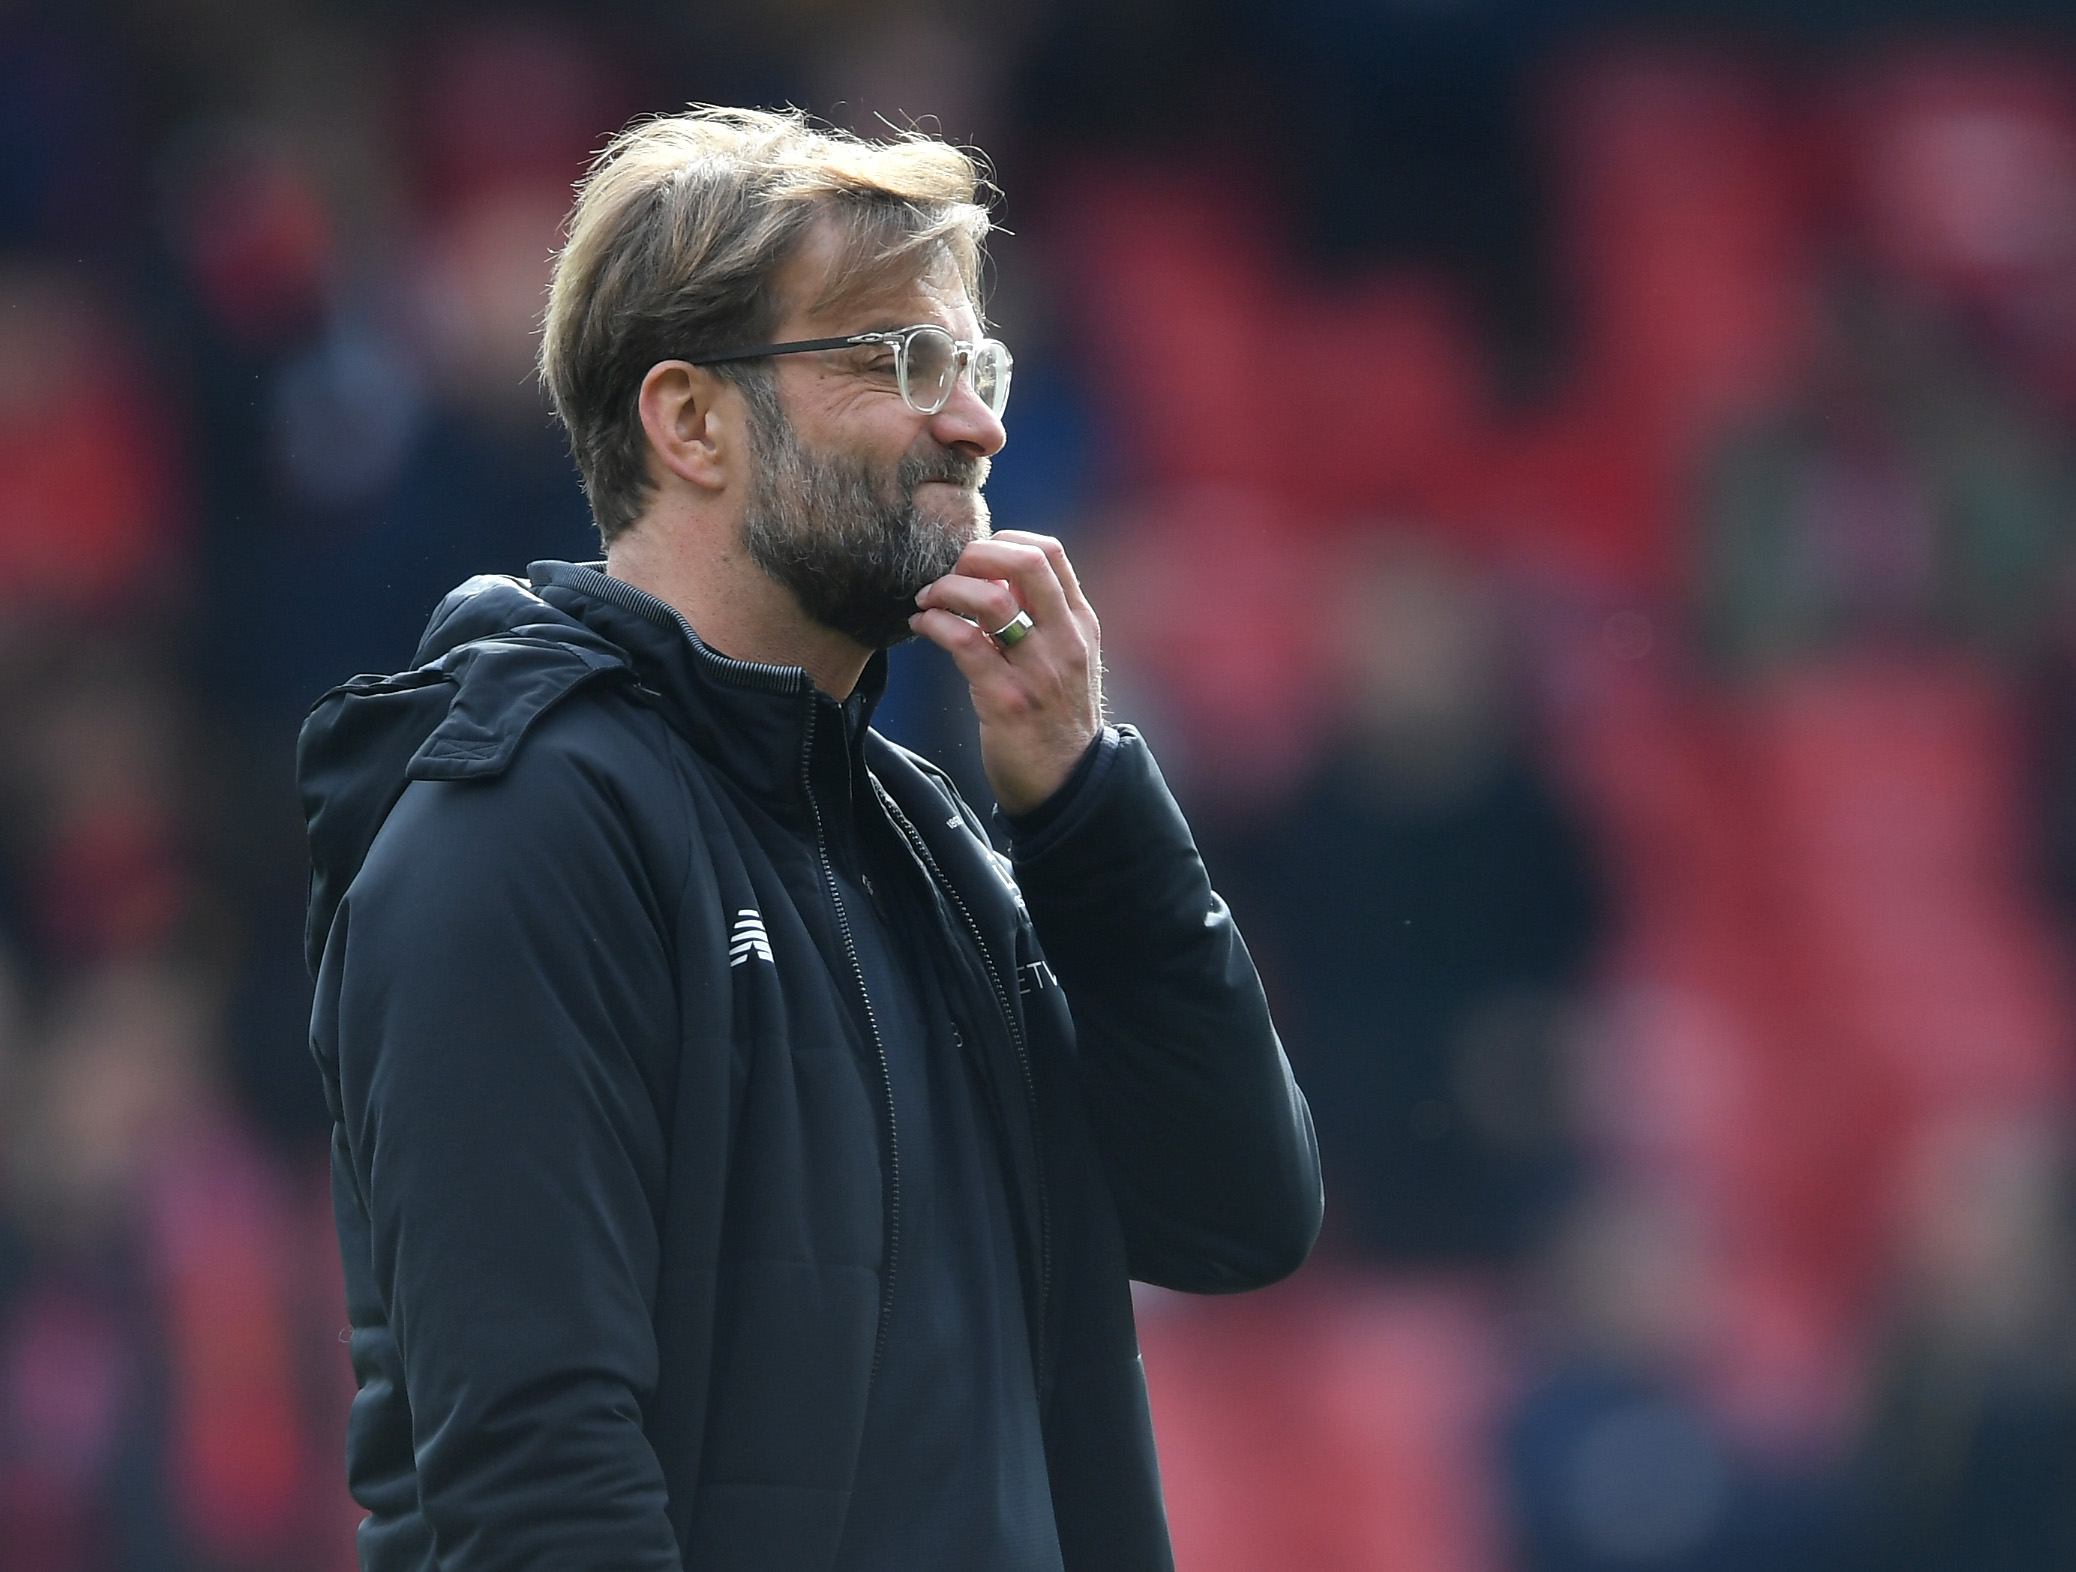 MANCHESTER, ENGLAND - MARCH 10: Jurgen Klopp of Liverpool looks on prior to the Premier League match between Manchester United and Liverpool at Old Trafford on March 10, 2018 in Manchester, England.  (Photo by Laurence Griffiths/Getty Images)